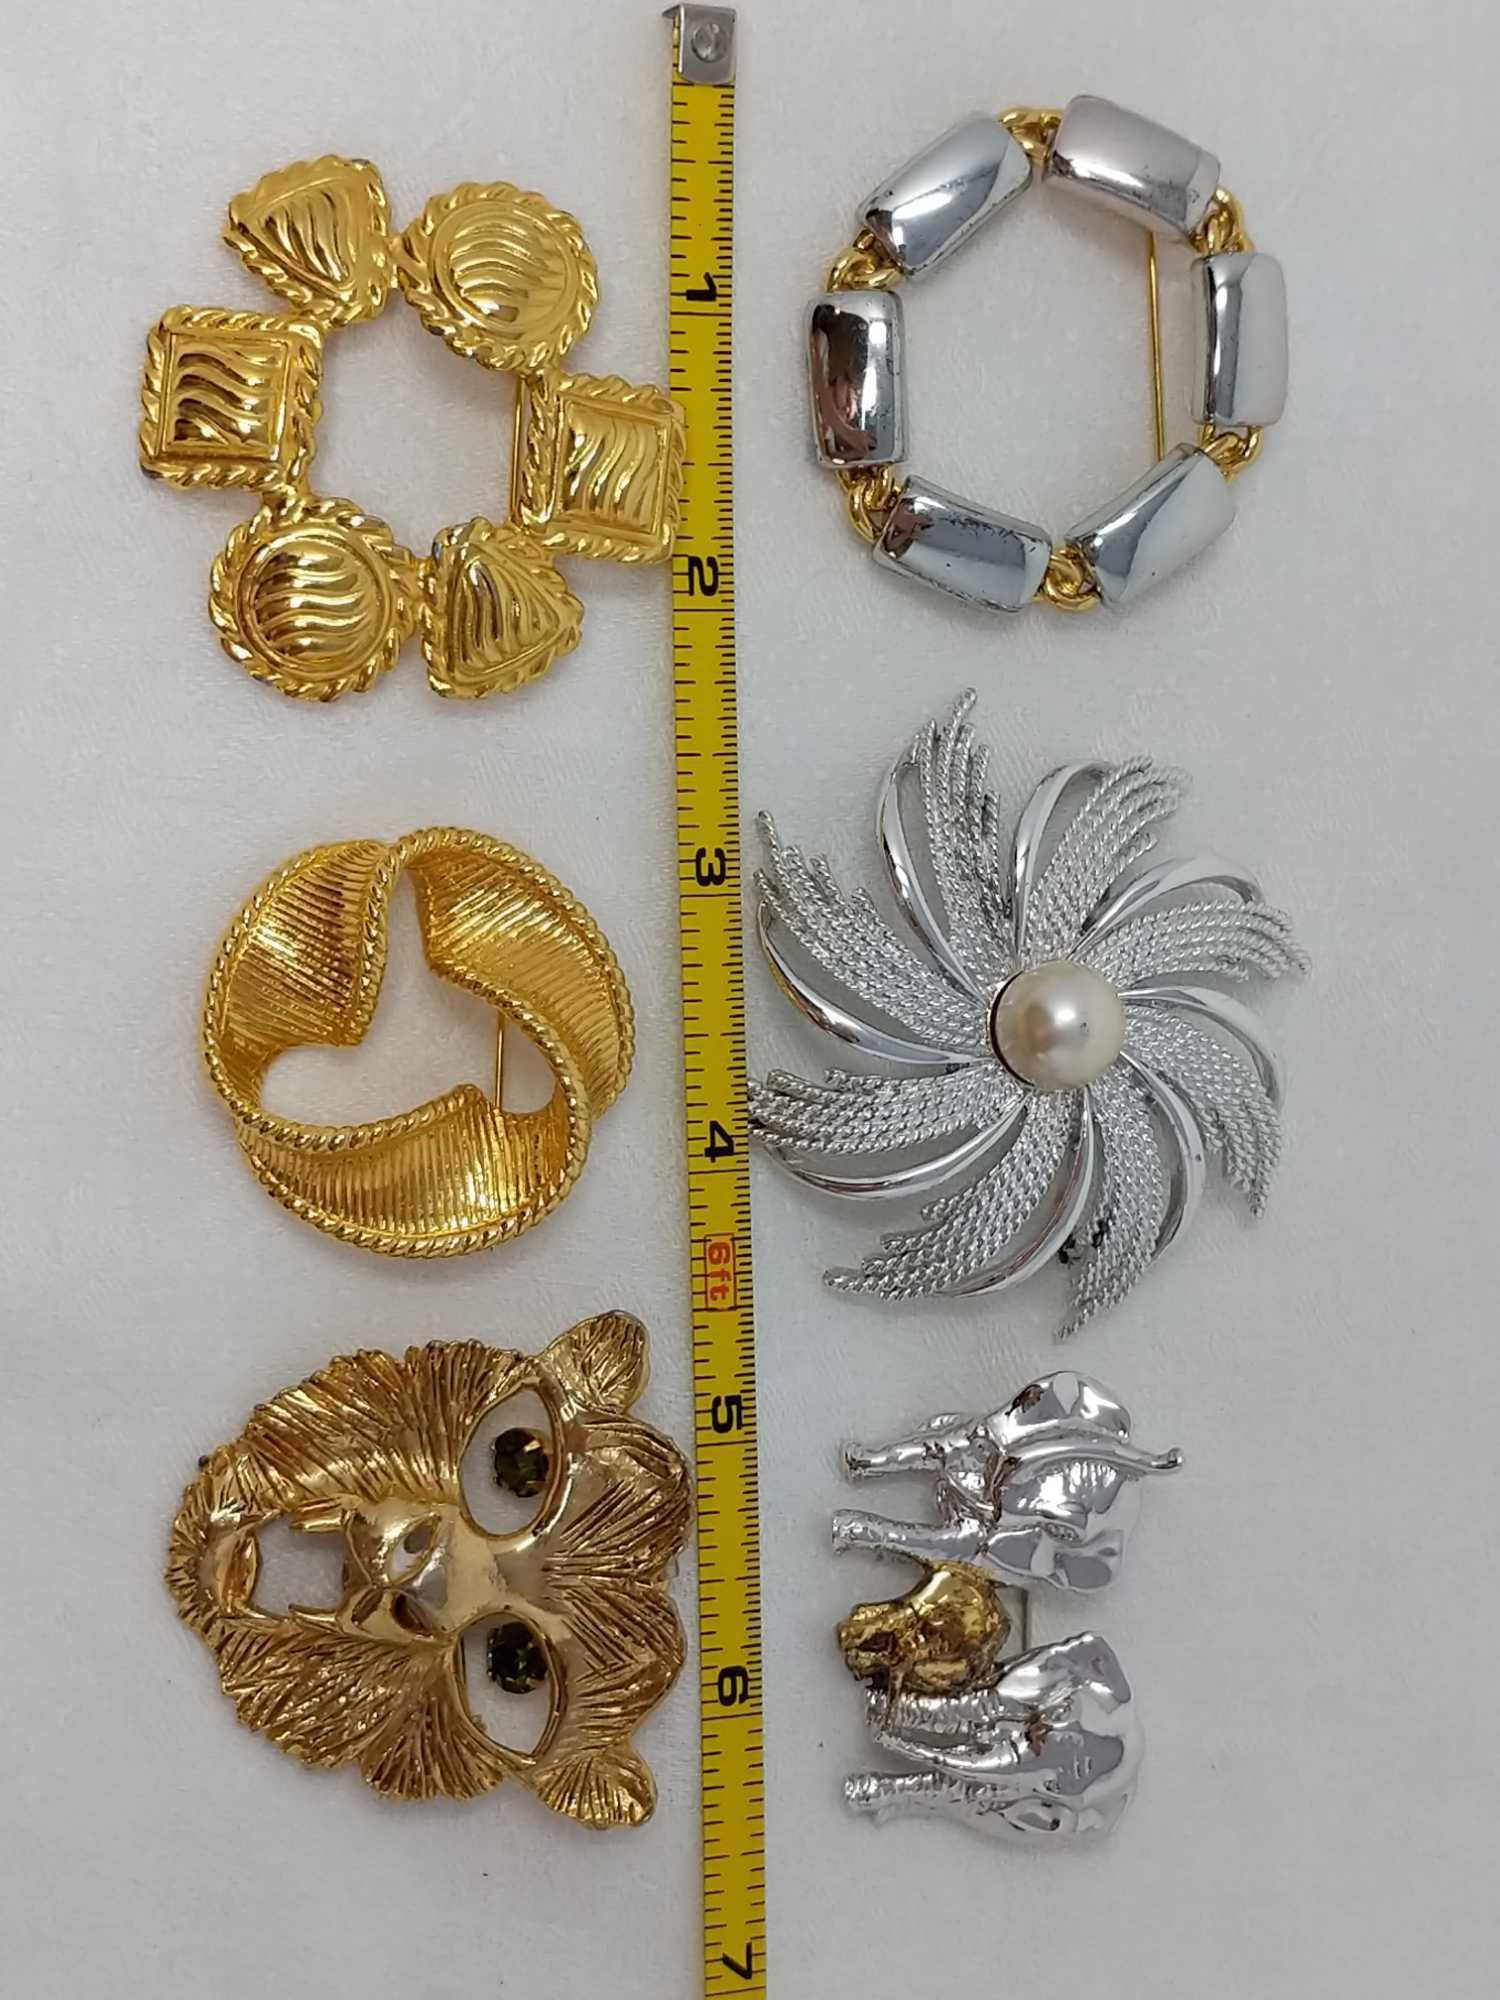 6 Costume Brooches